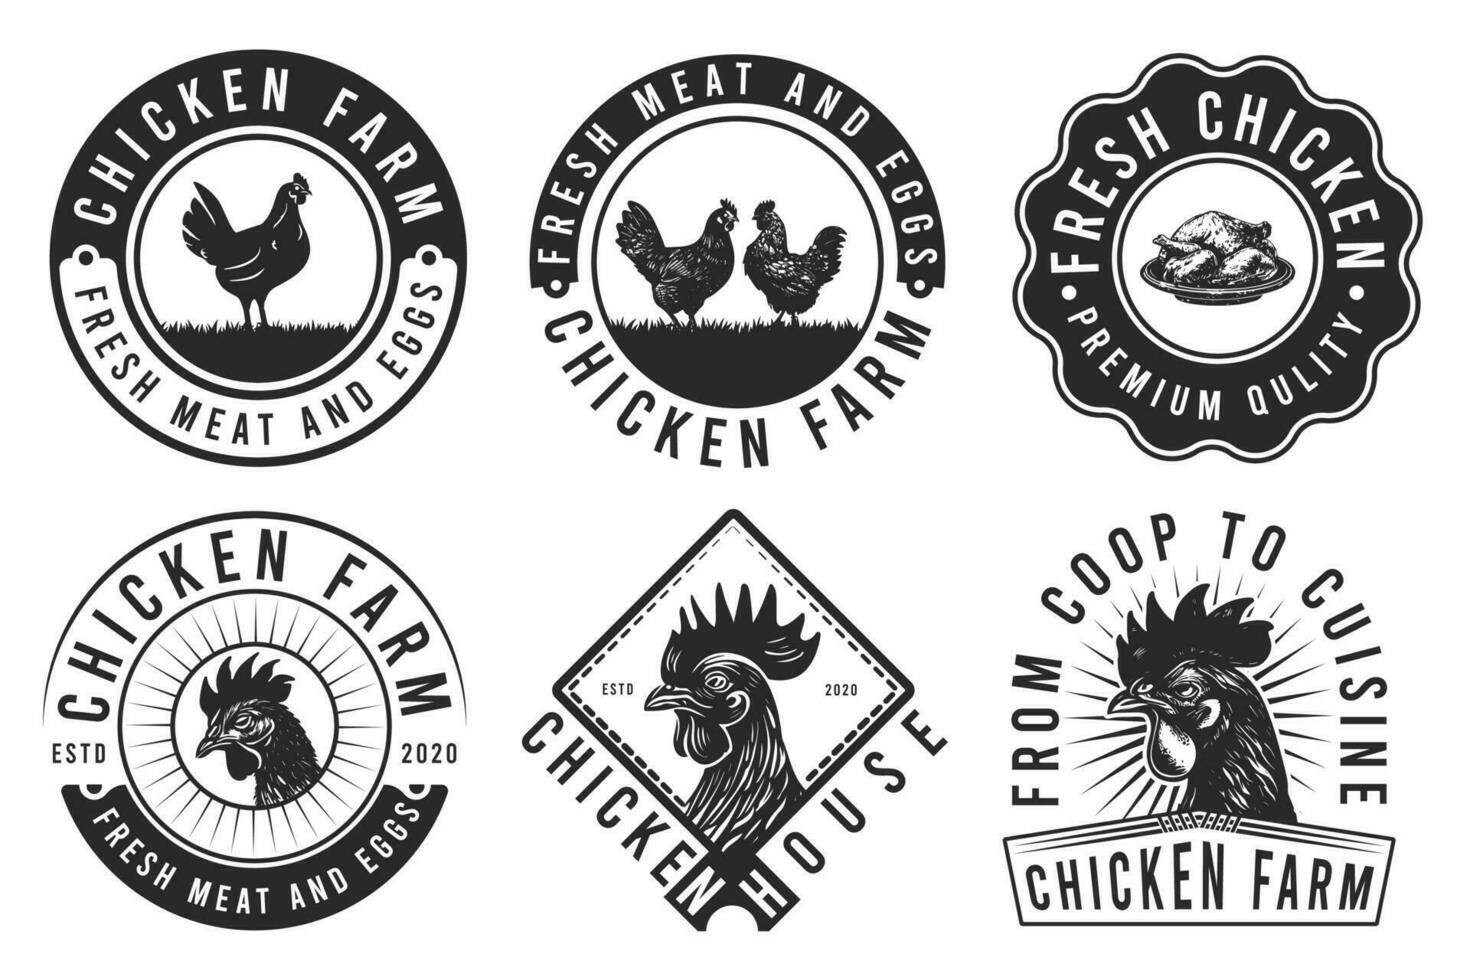 Chicken Farm Badge or Label. Chicken rooster poultry farm vintage badge logo design inspiration. Elements on the theme of the chicken, pork, and milk farming business. vector